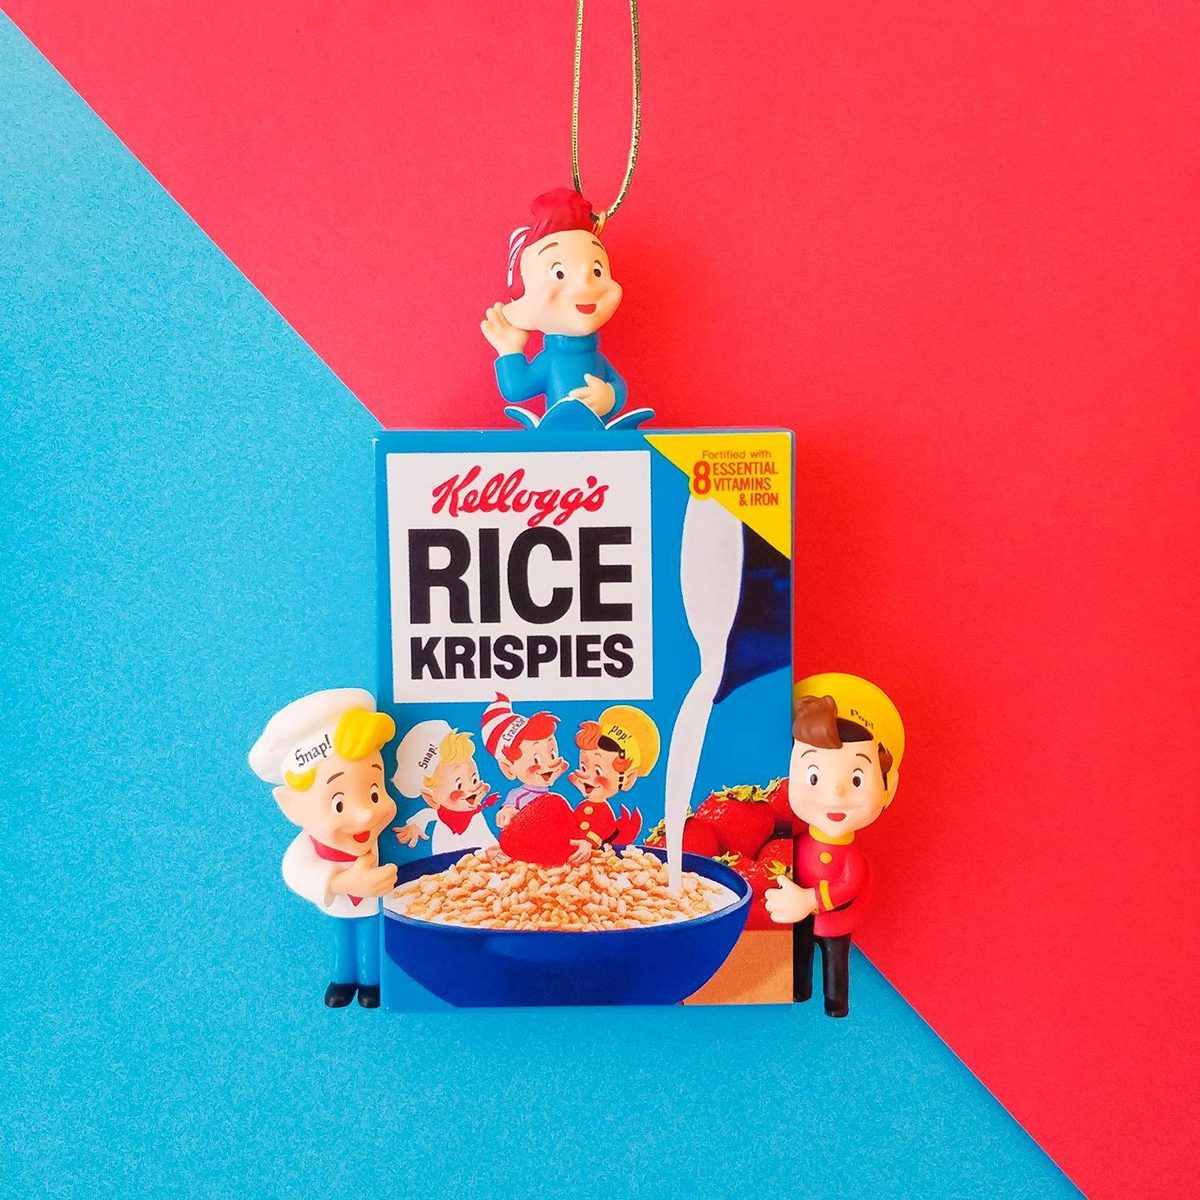 <p><strong><a class="SWhtmlLink" href="https://www.ricekrispies.com/en_US/home.html" rel="noopener">Rice Krispies</a>, Rock Hill</strong></p> <p>Rice Krispies cereal might not have been invented in South Carolina, but the man responsible for their branding lived in Rock Hill. Illustrator Vernon Grant created the characters Snap, Crackle and Pop—which is considered by many to be one of the greatest moves in American advertising.</p>